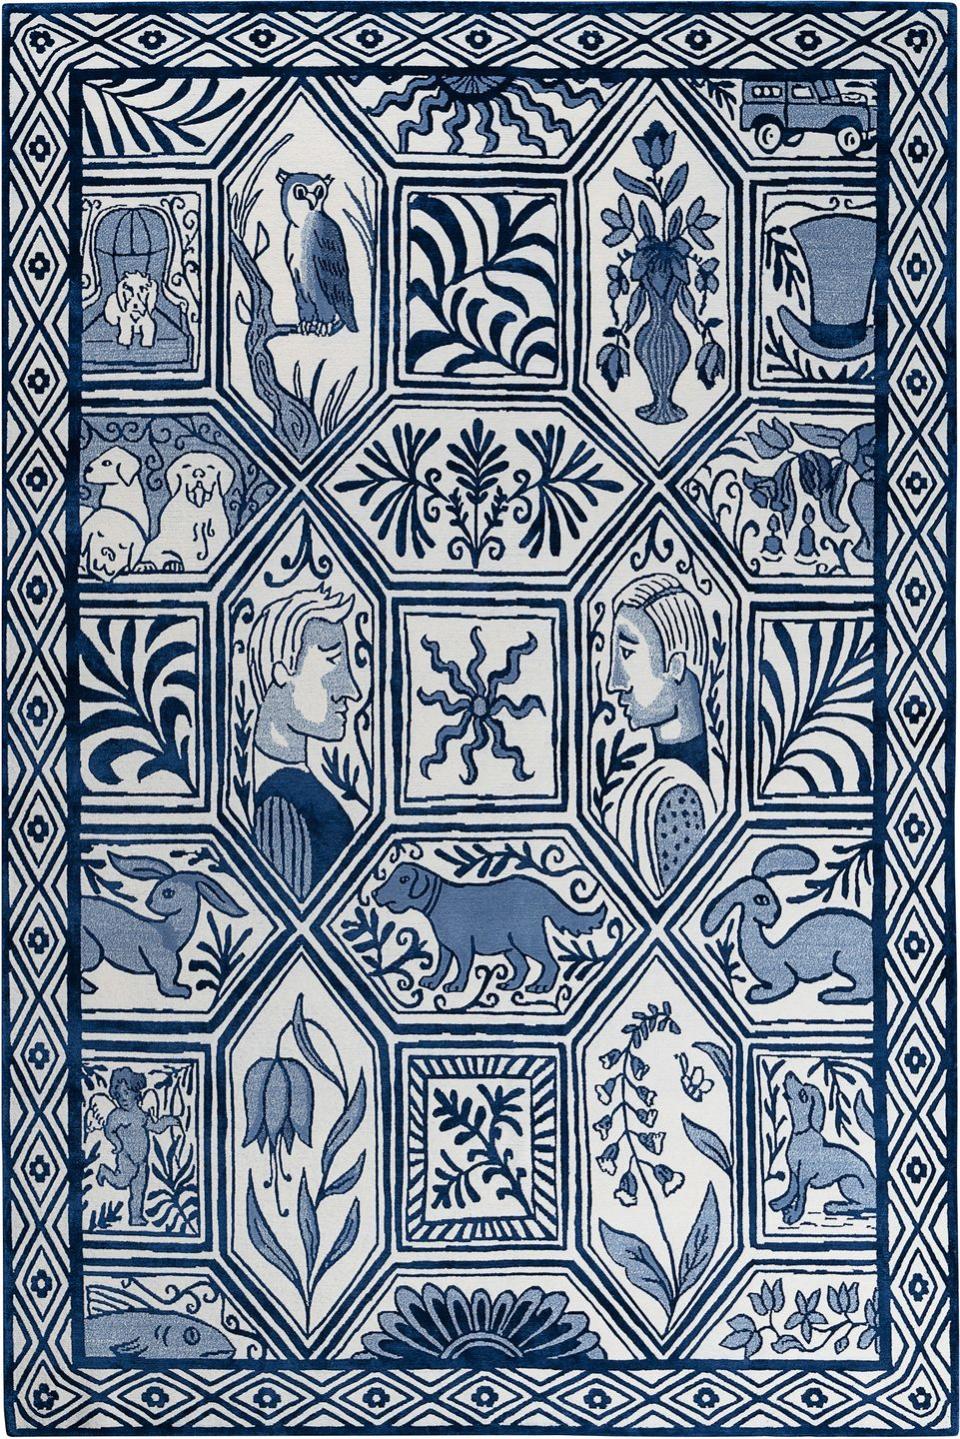 blue and white design rug that looks like delftware with faces and animals in blue frames